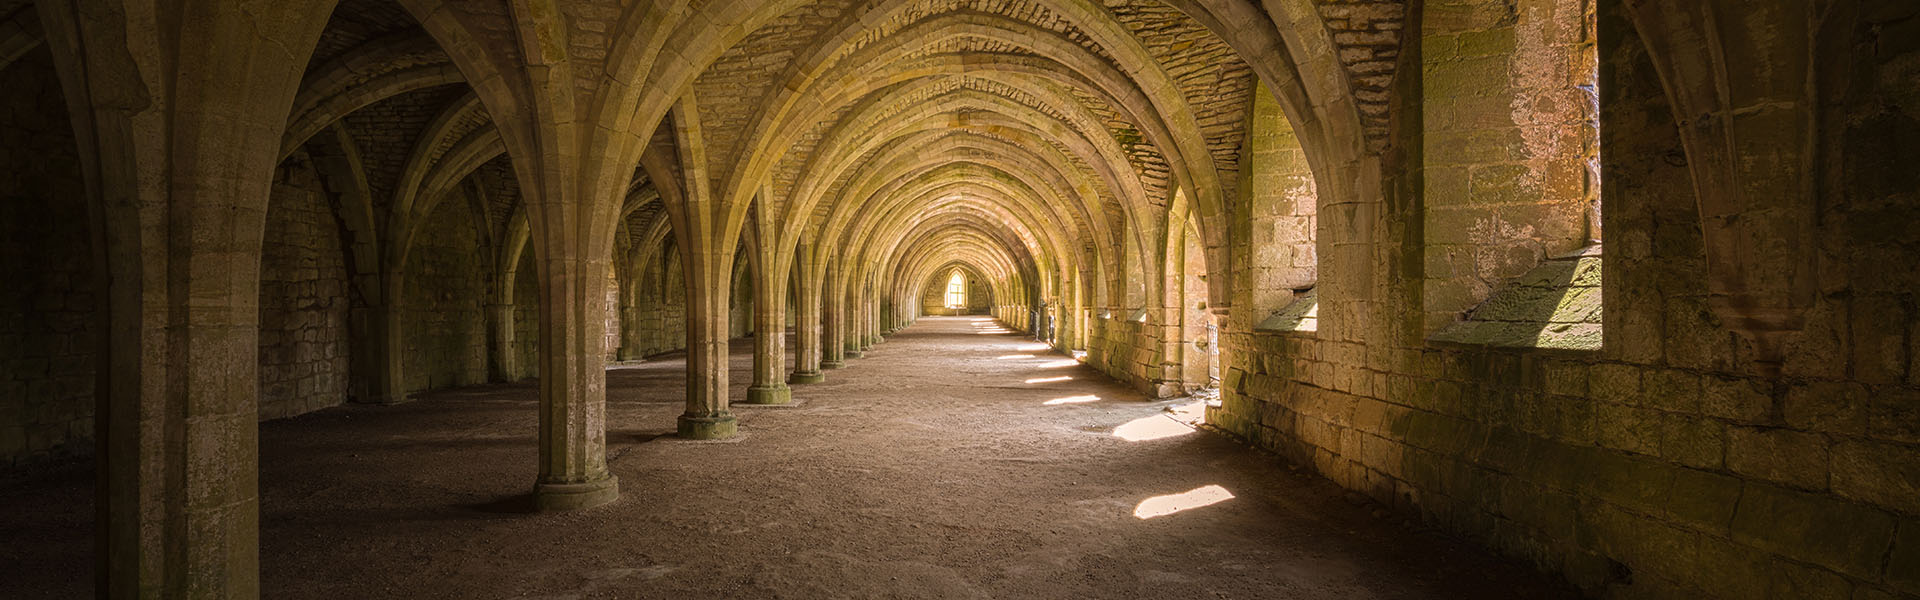 Fountains Abbey Hallway with arches and windows